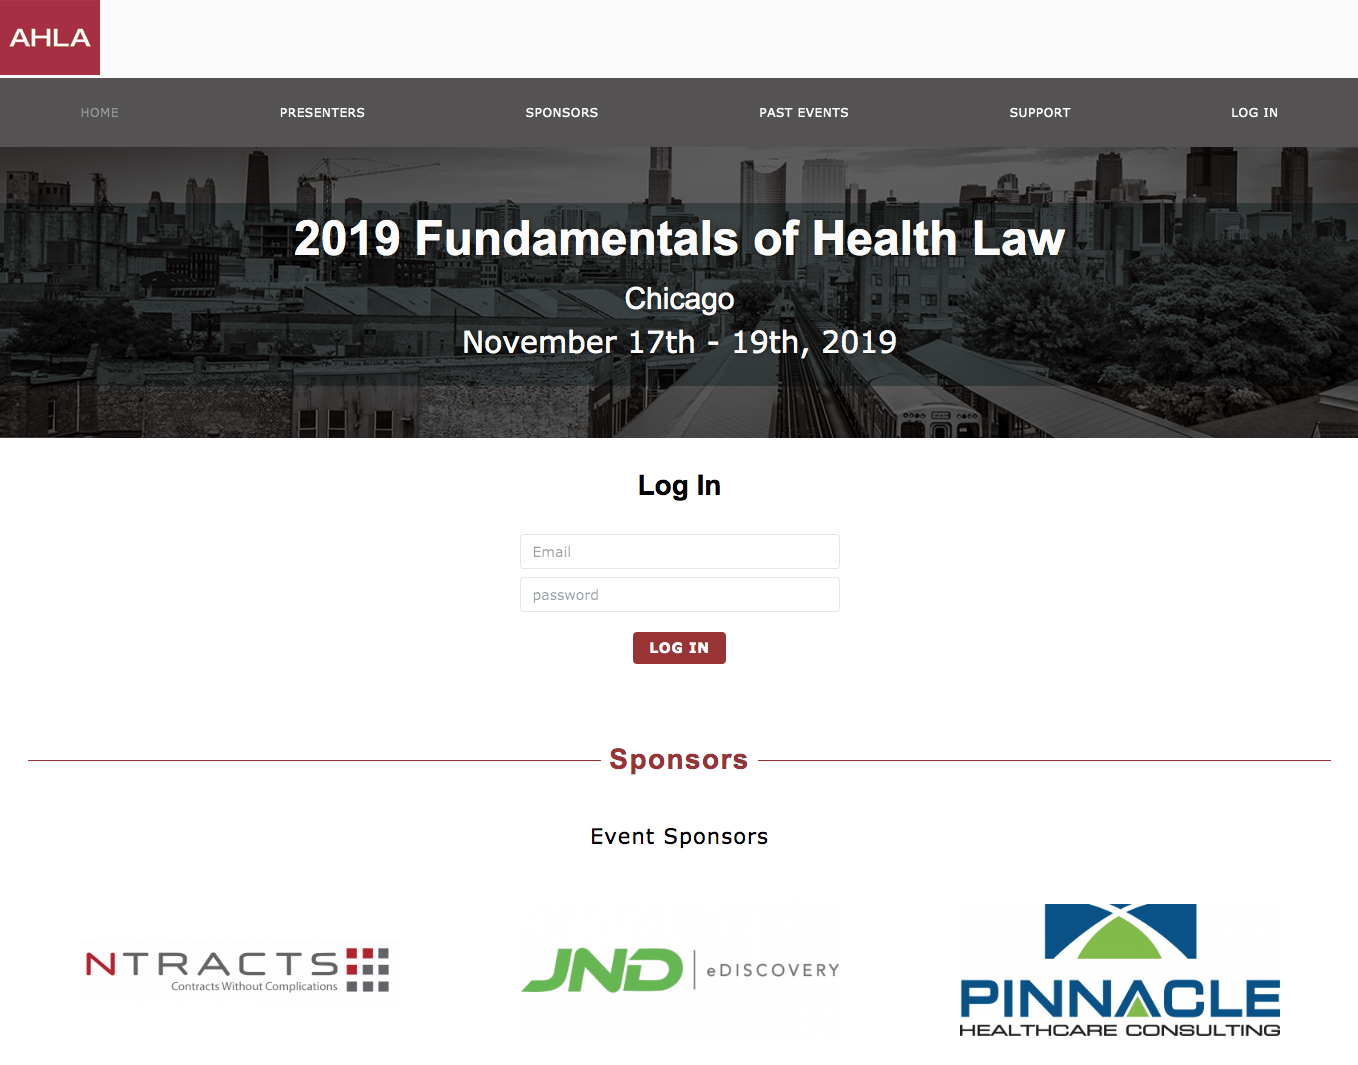 Chicago! Live Streaming for American Health Lawyers